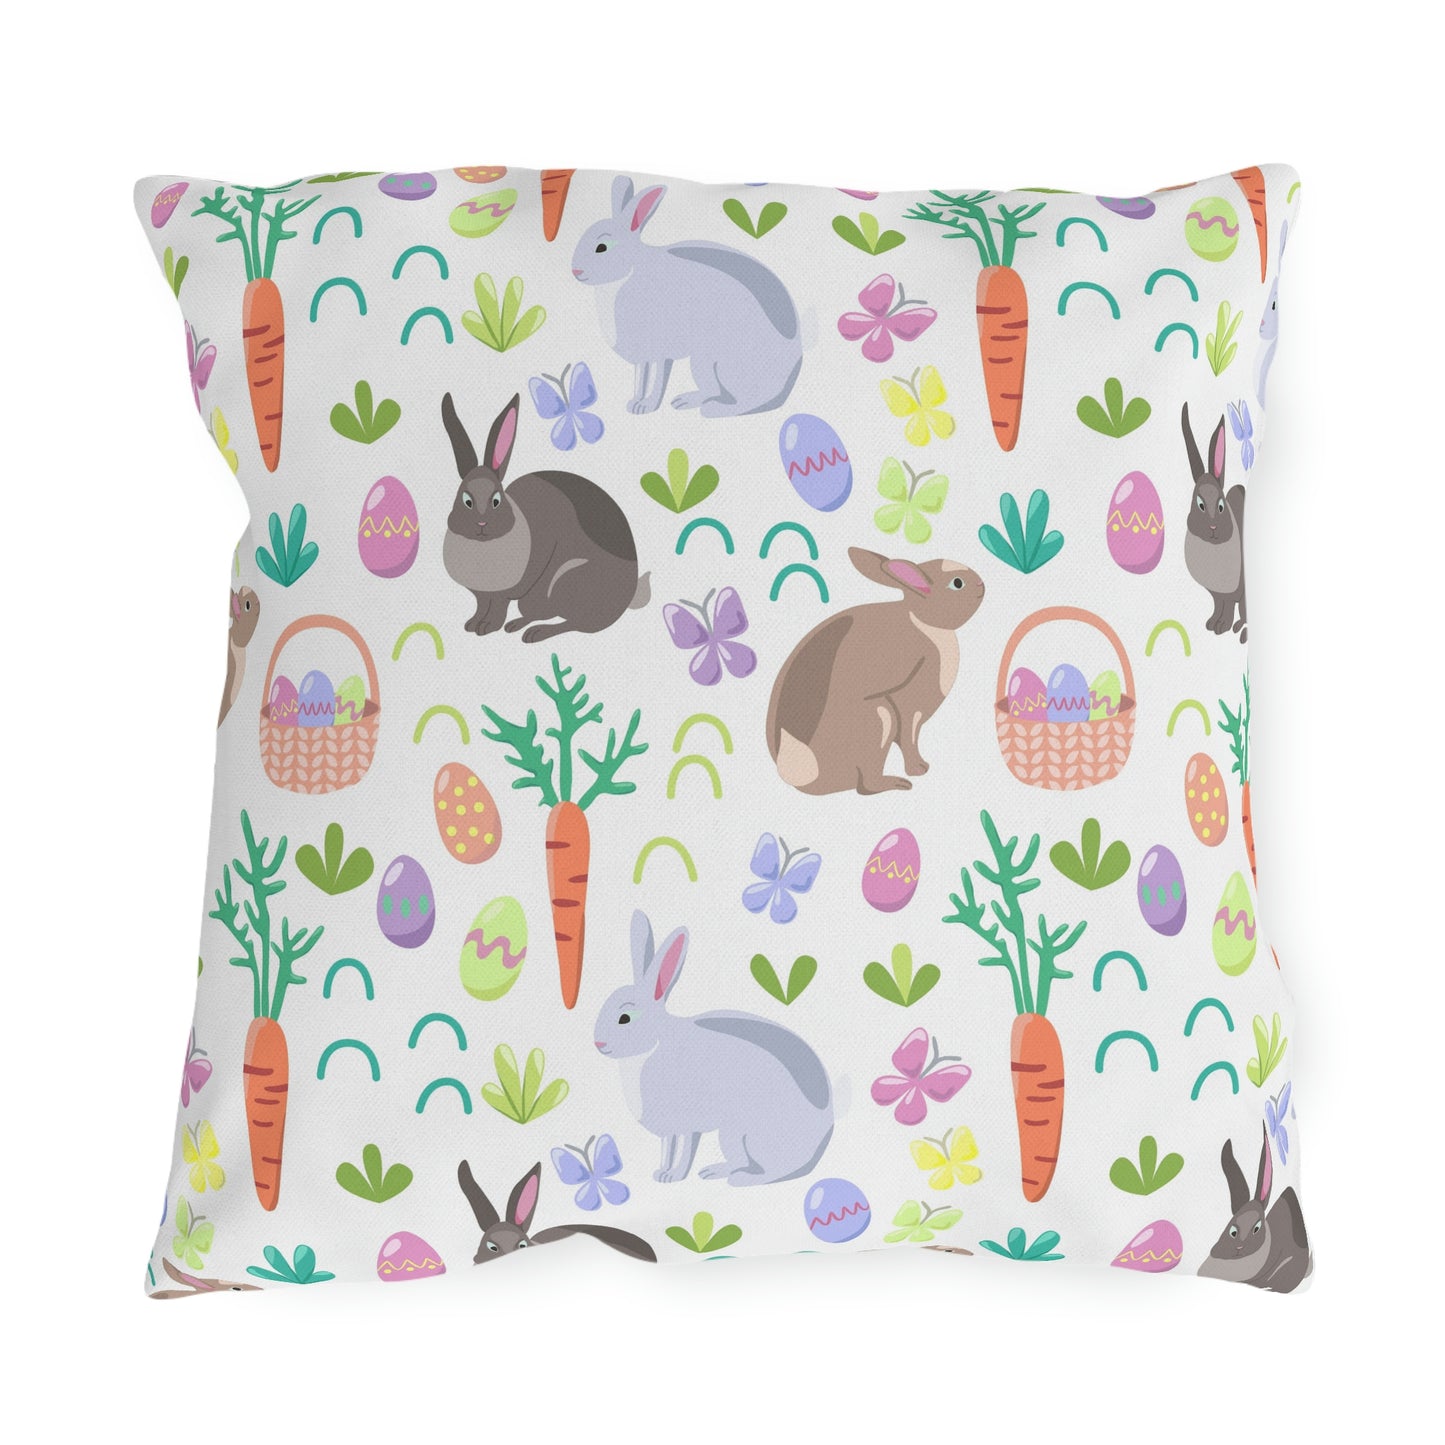 Easter Baskets, Carrots and Rabbits Outdoor Pillow